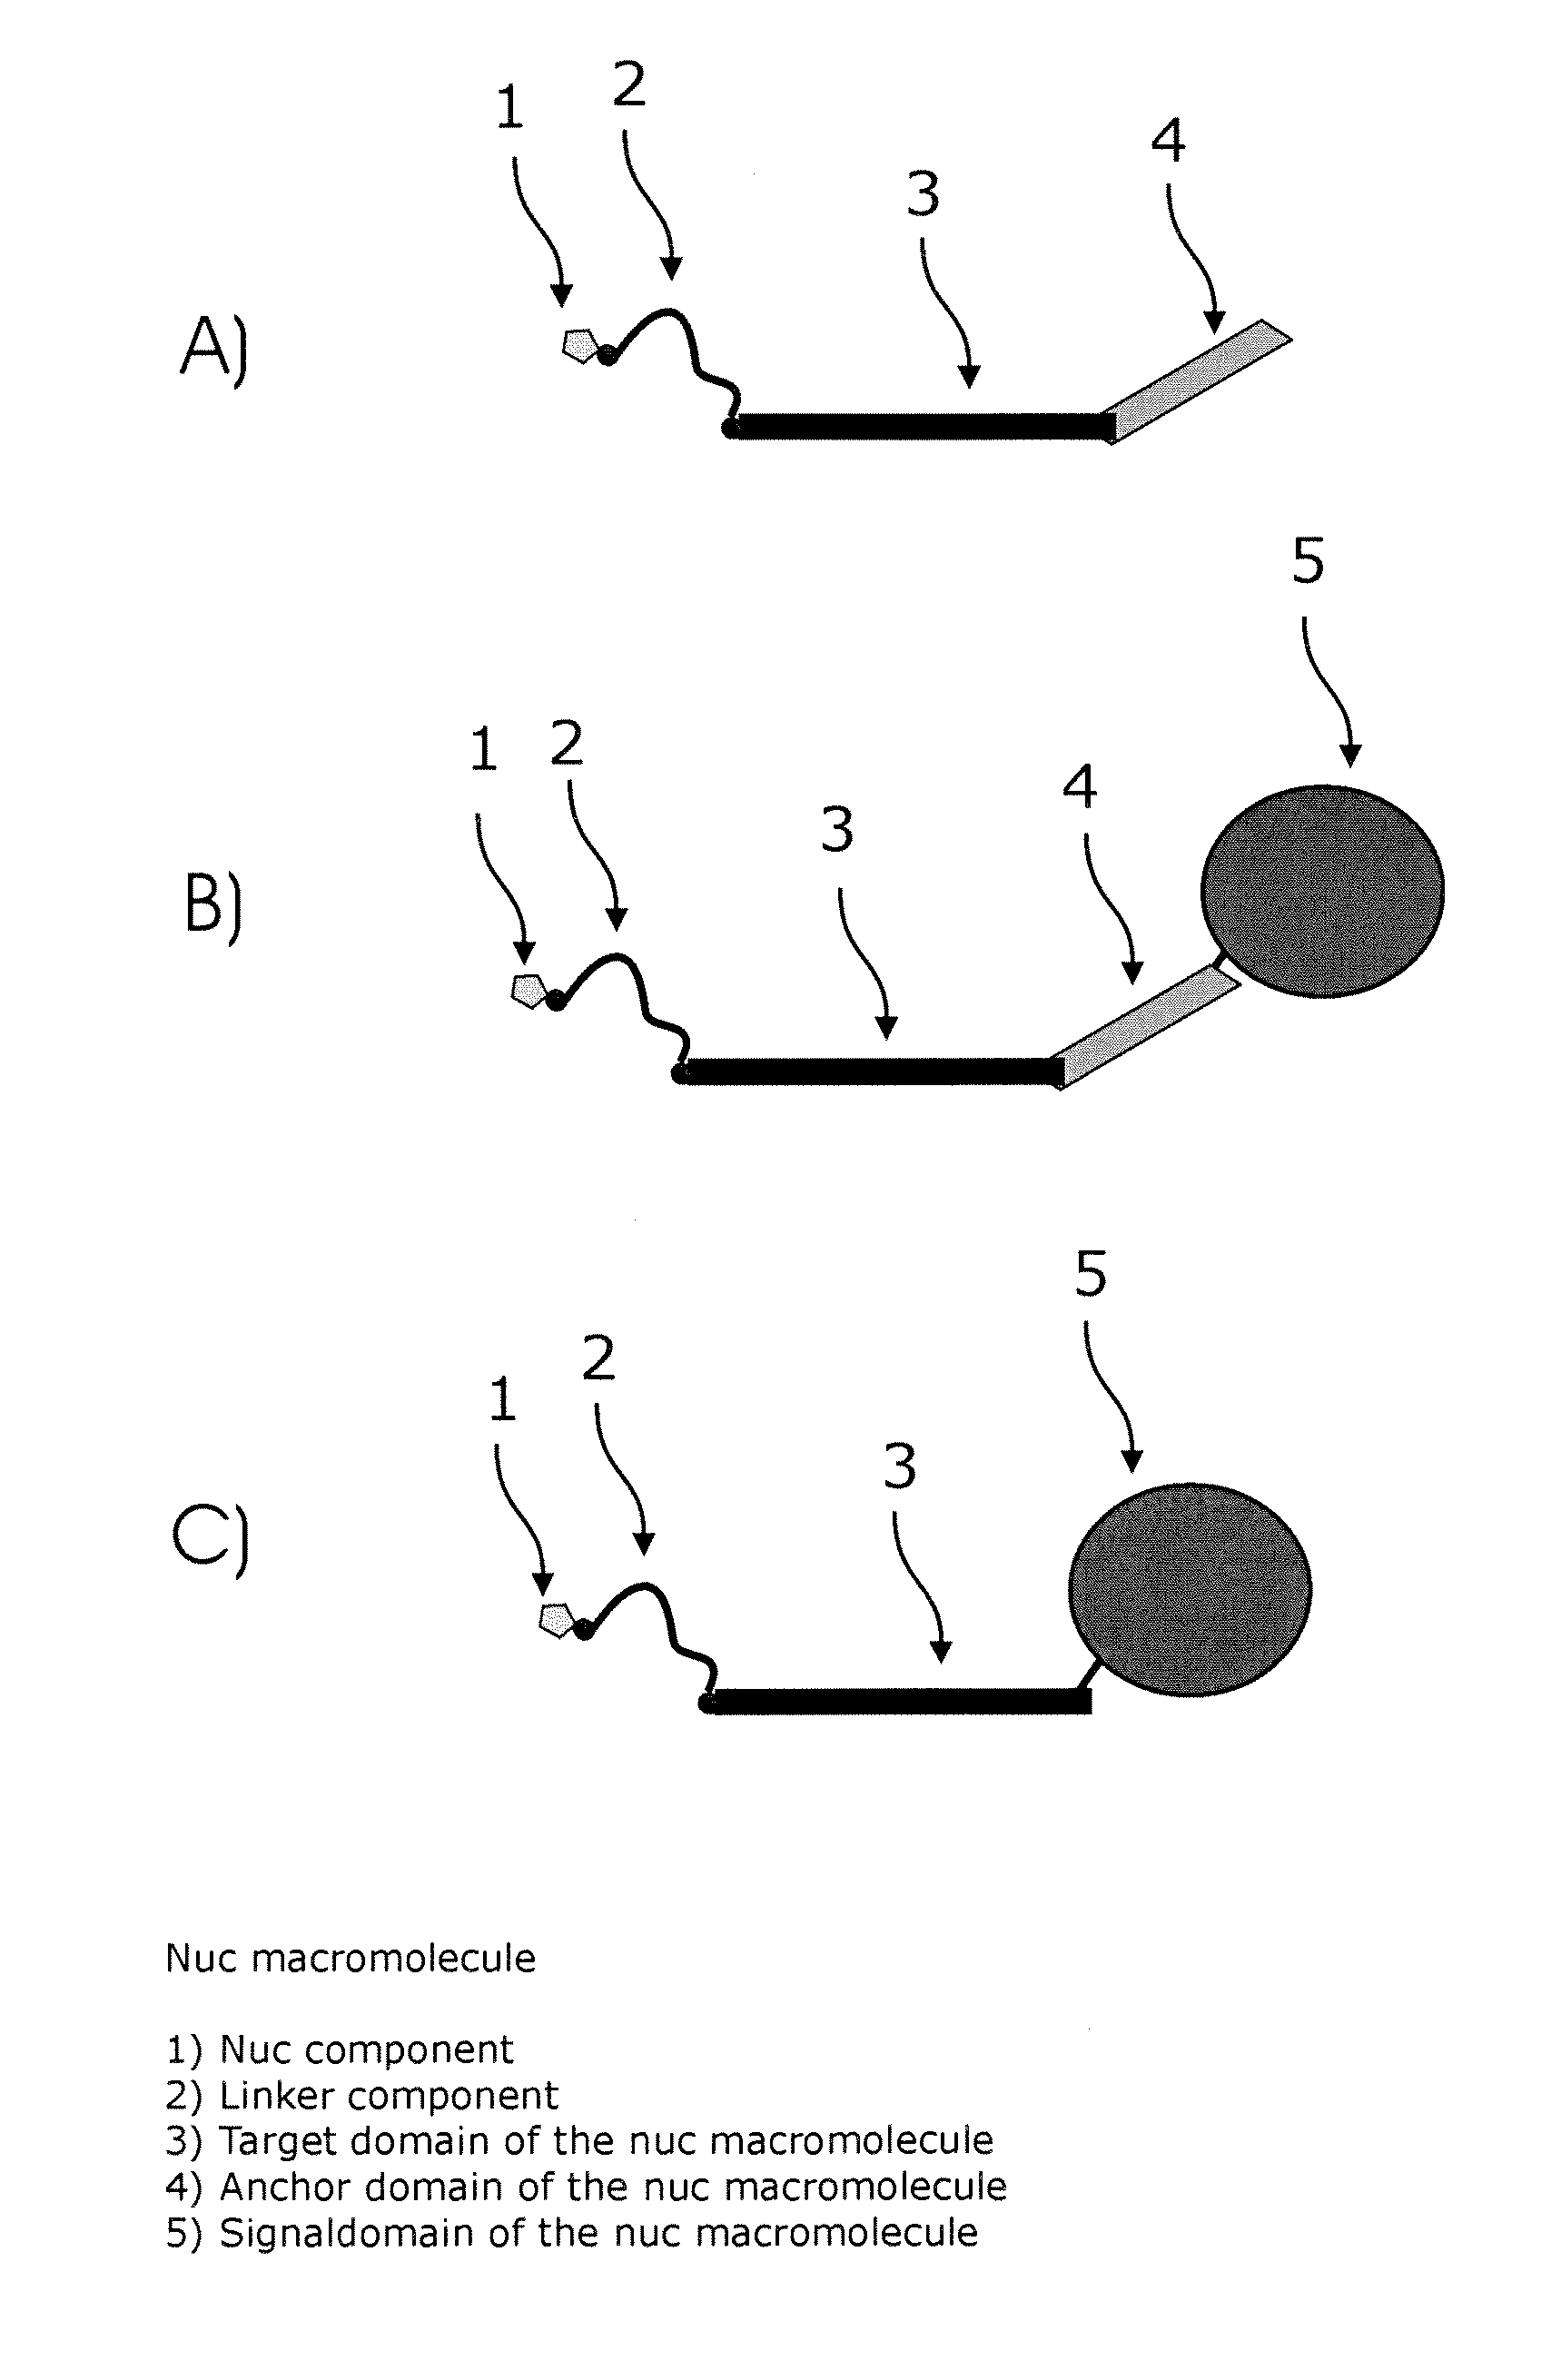 Conjugates of nucleotides and method for the application thereof